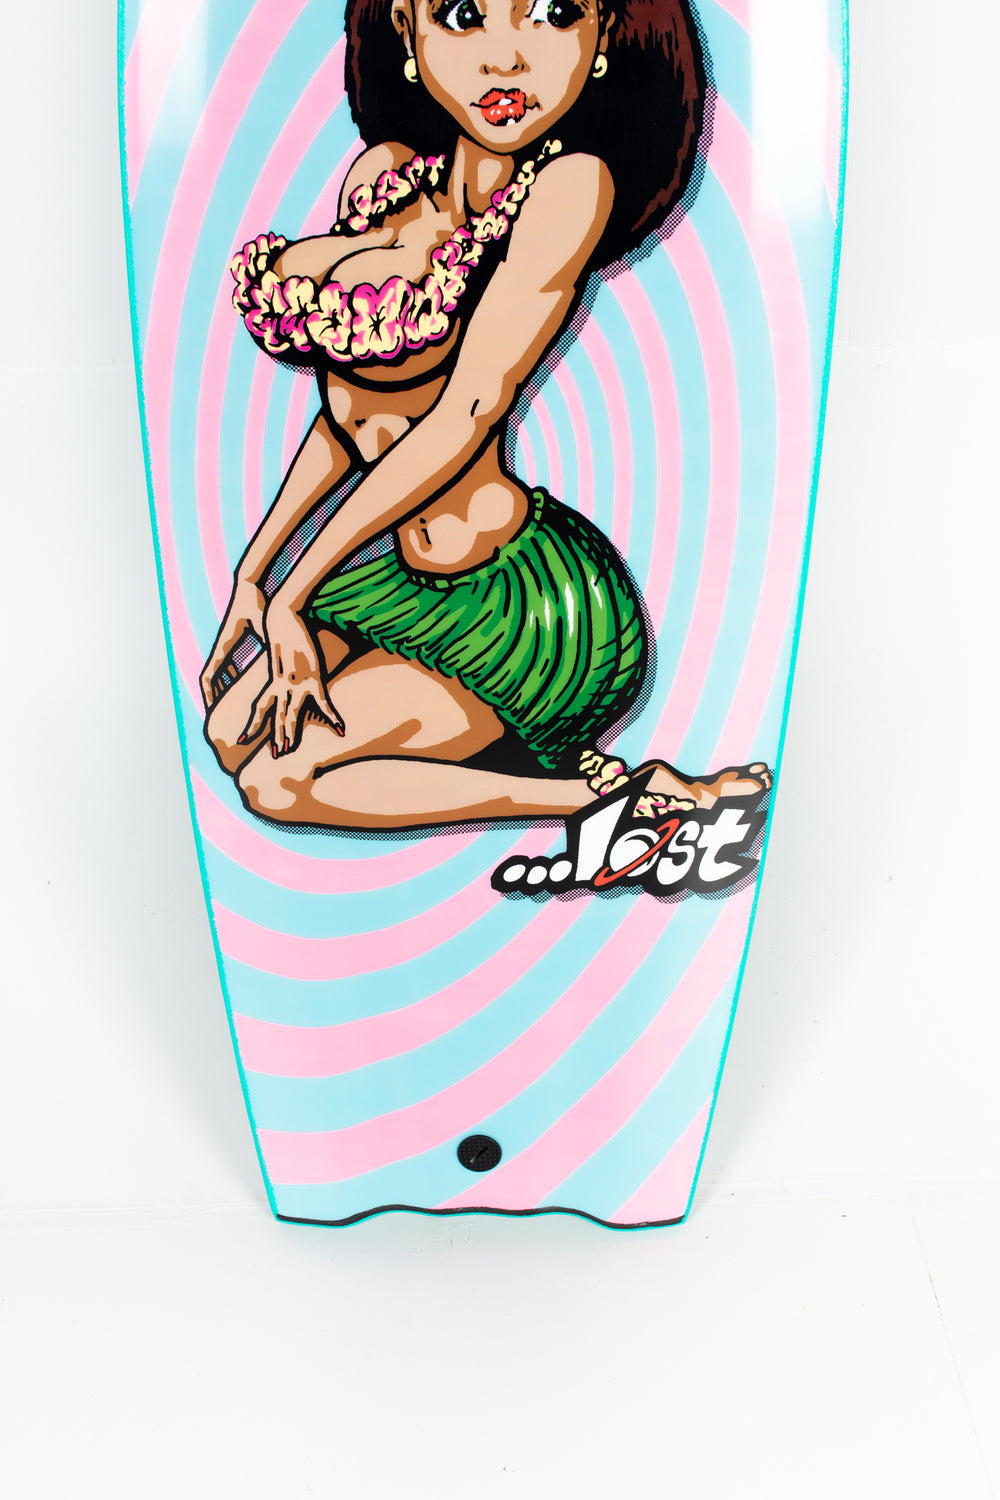 Catch Surf - BEATER original 54 LOST EDITION - HULA Finless 